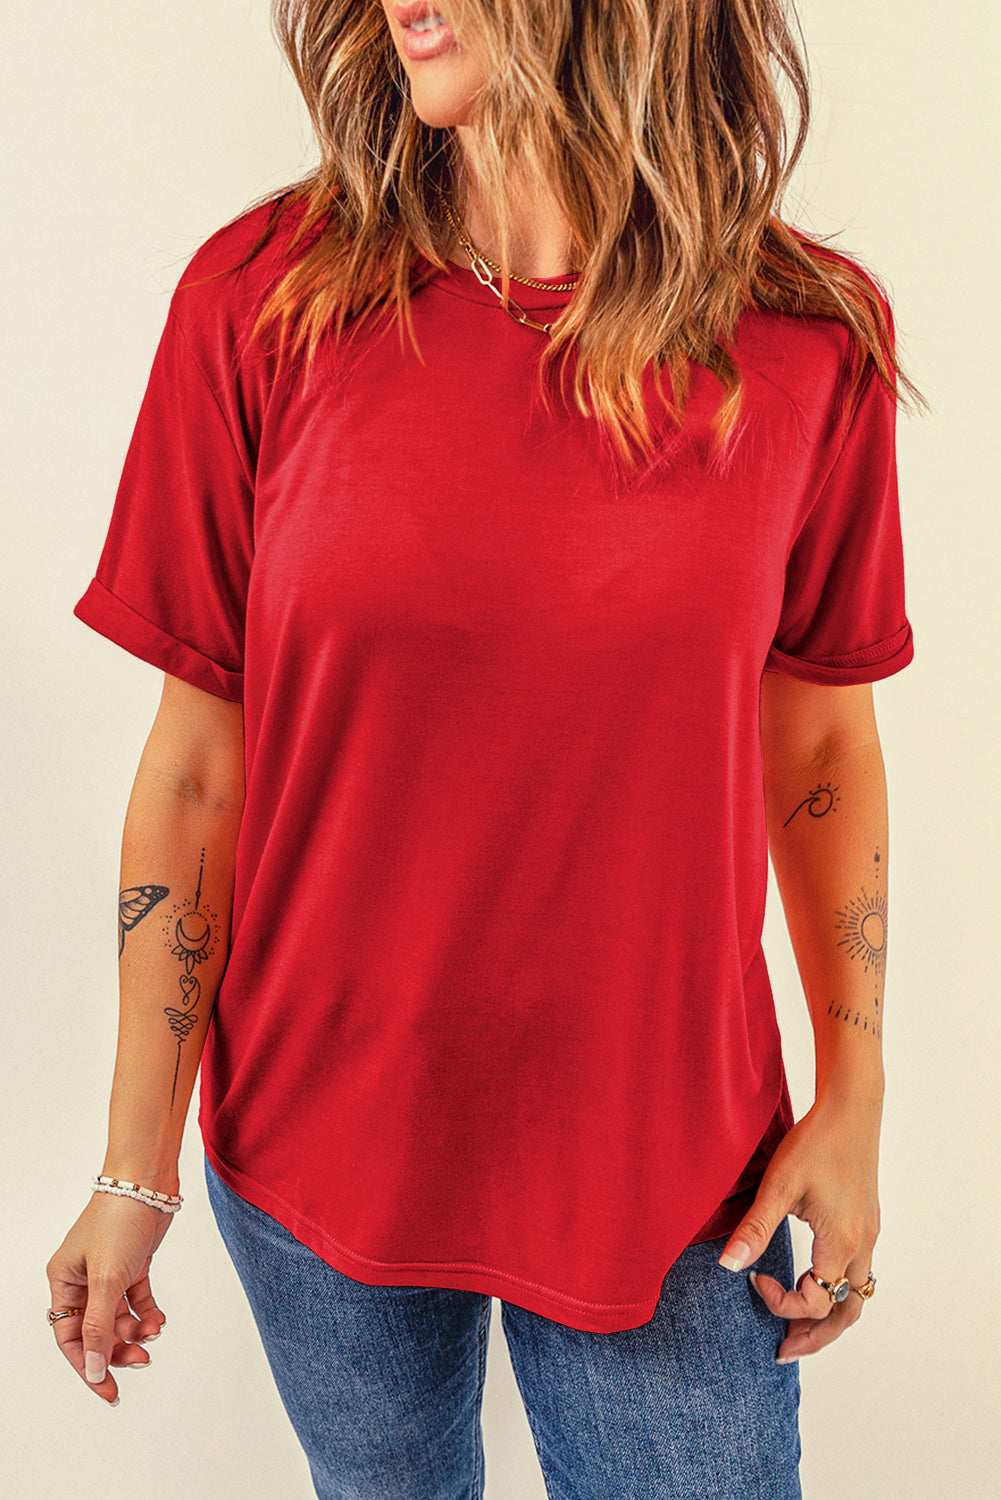 Rose Red Casual Plain Crew Neck Tee